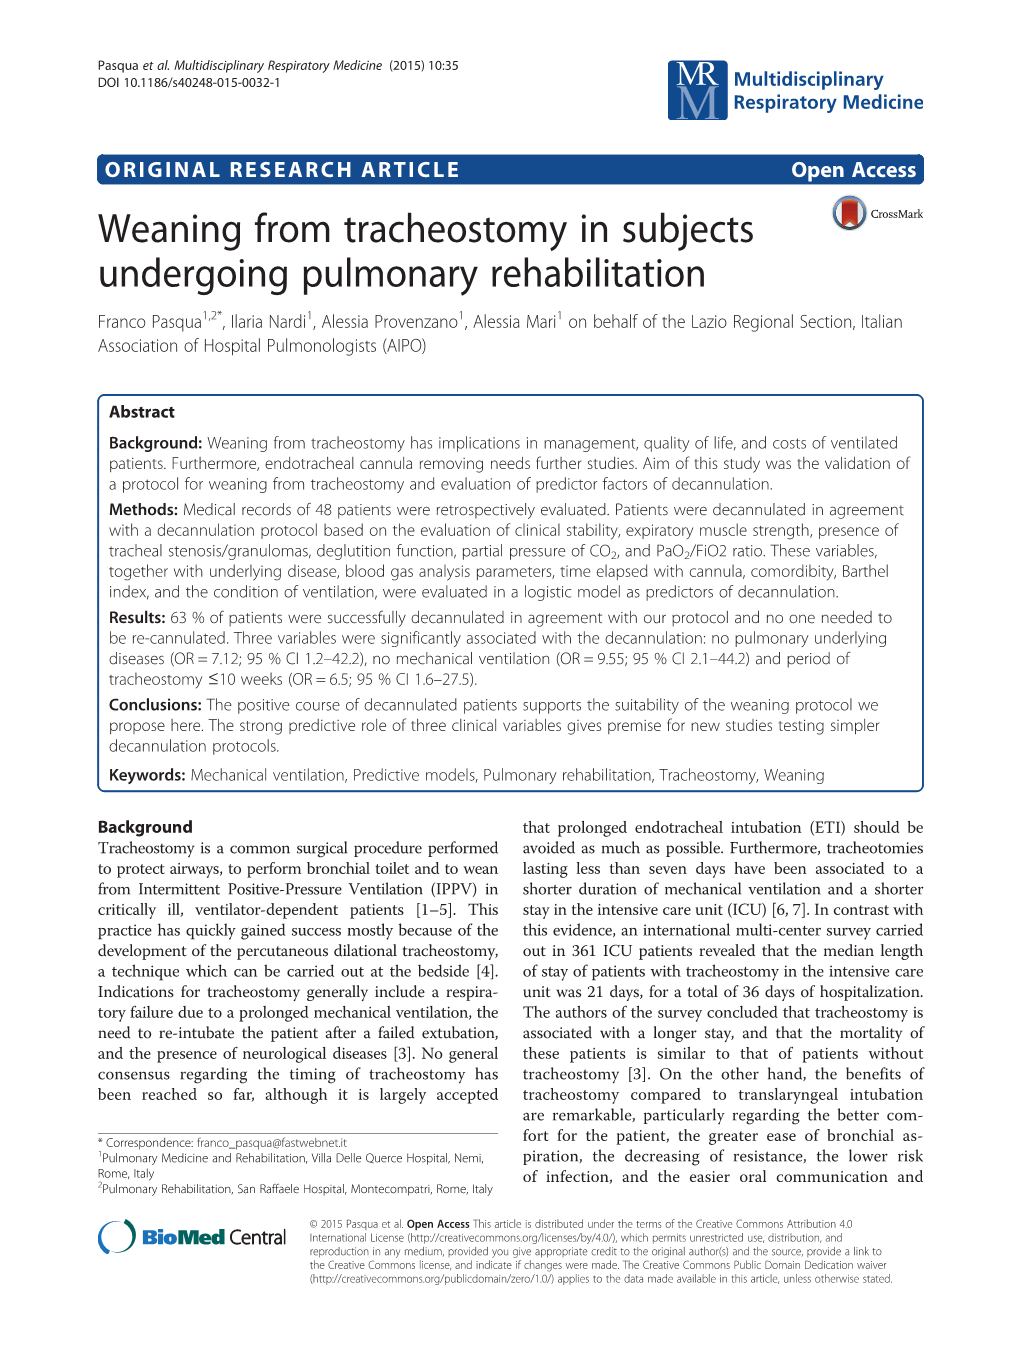 Weaning from Tracheostomy in Subjects Undergoing Pulmonary